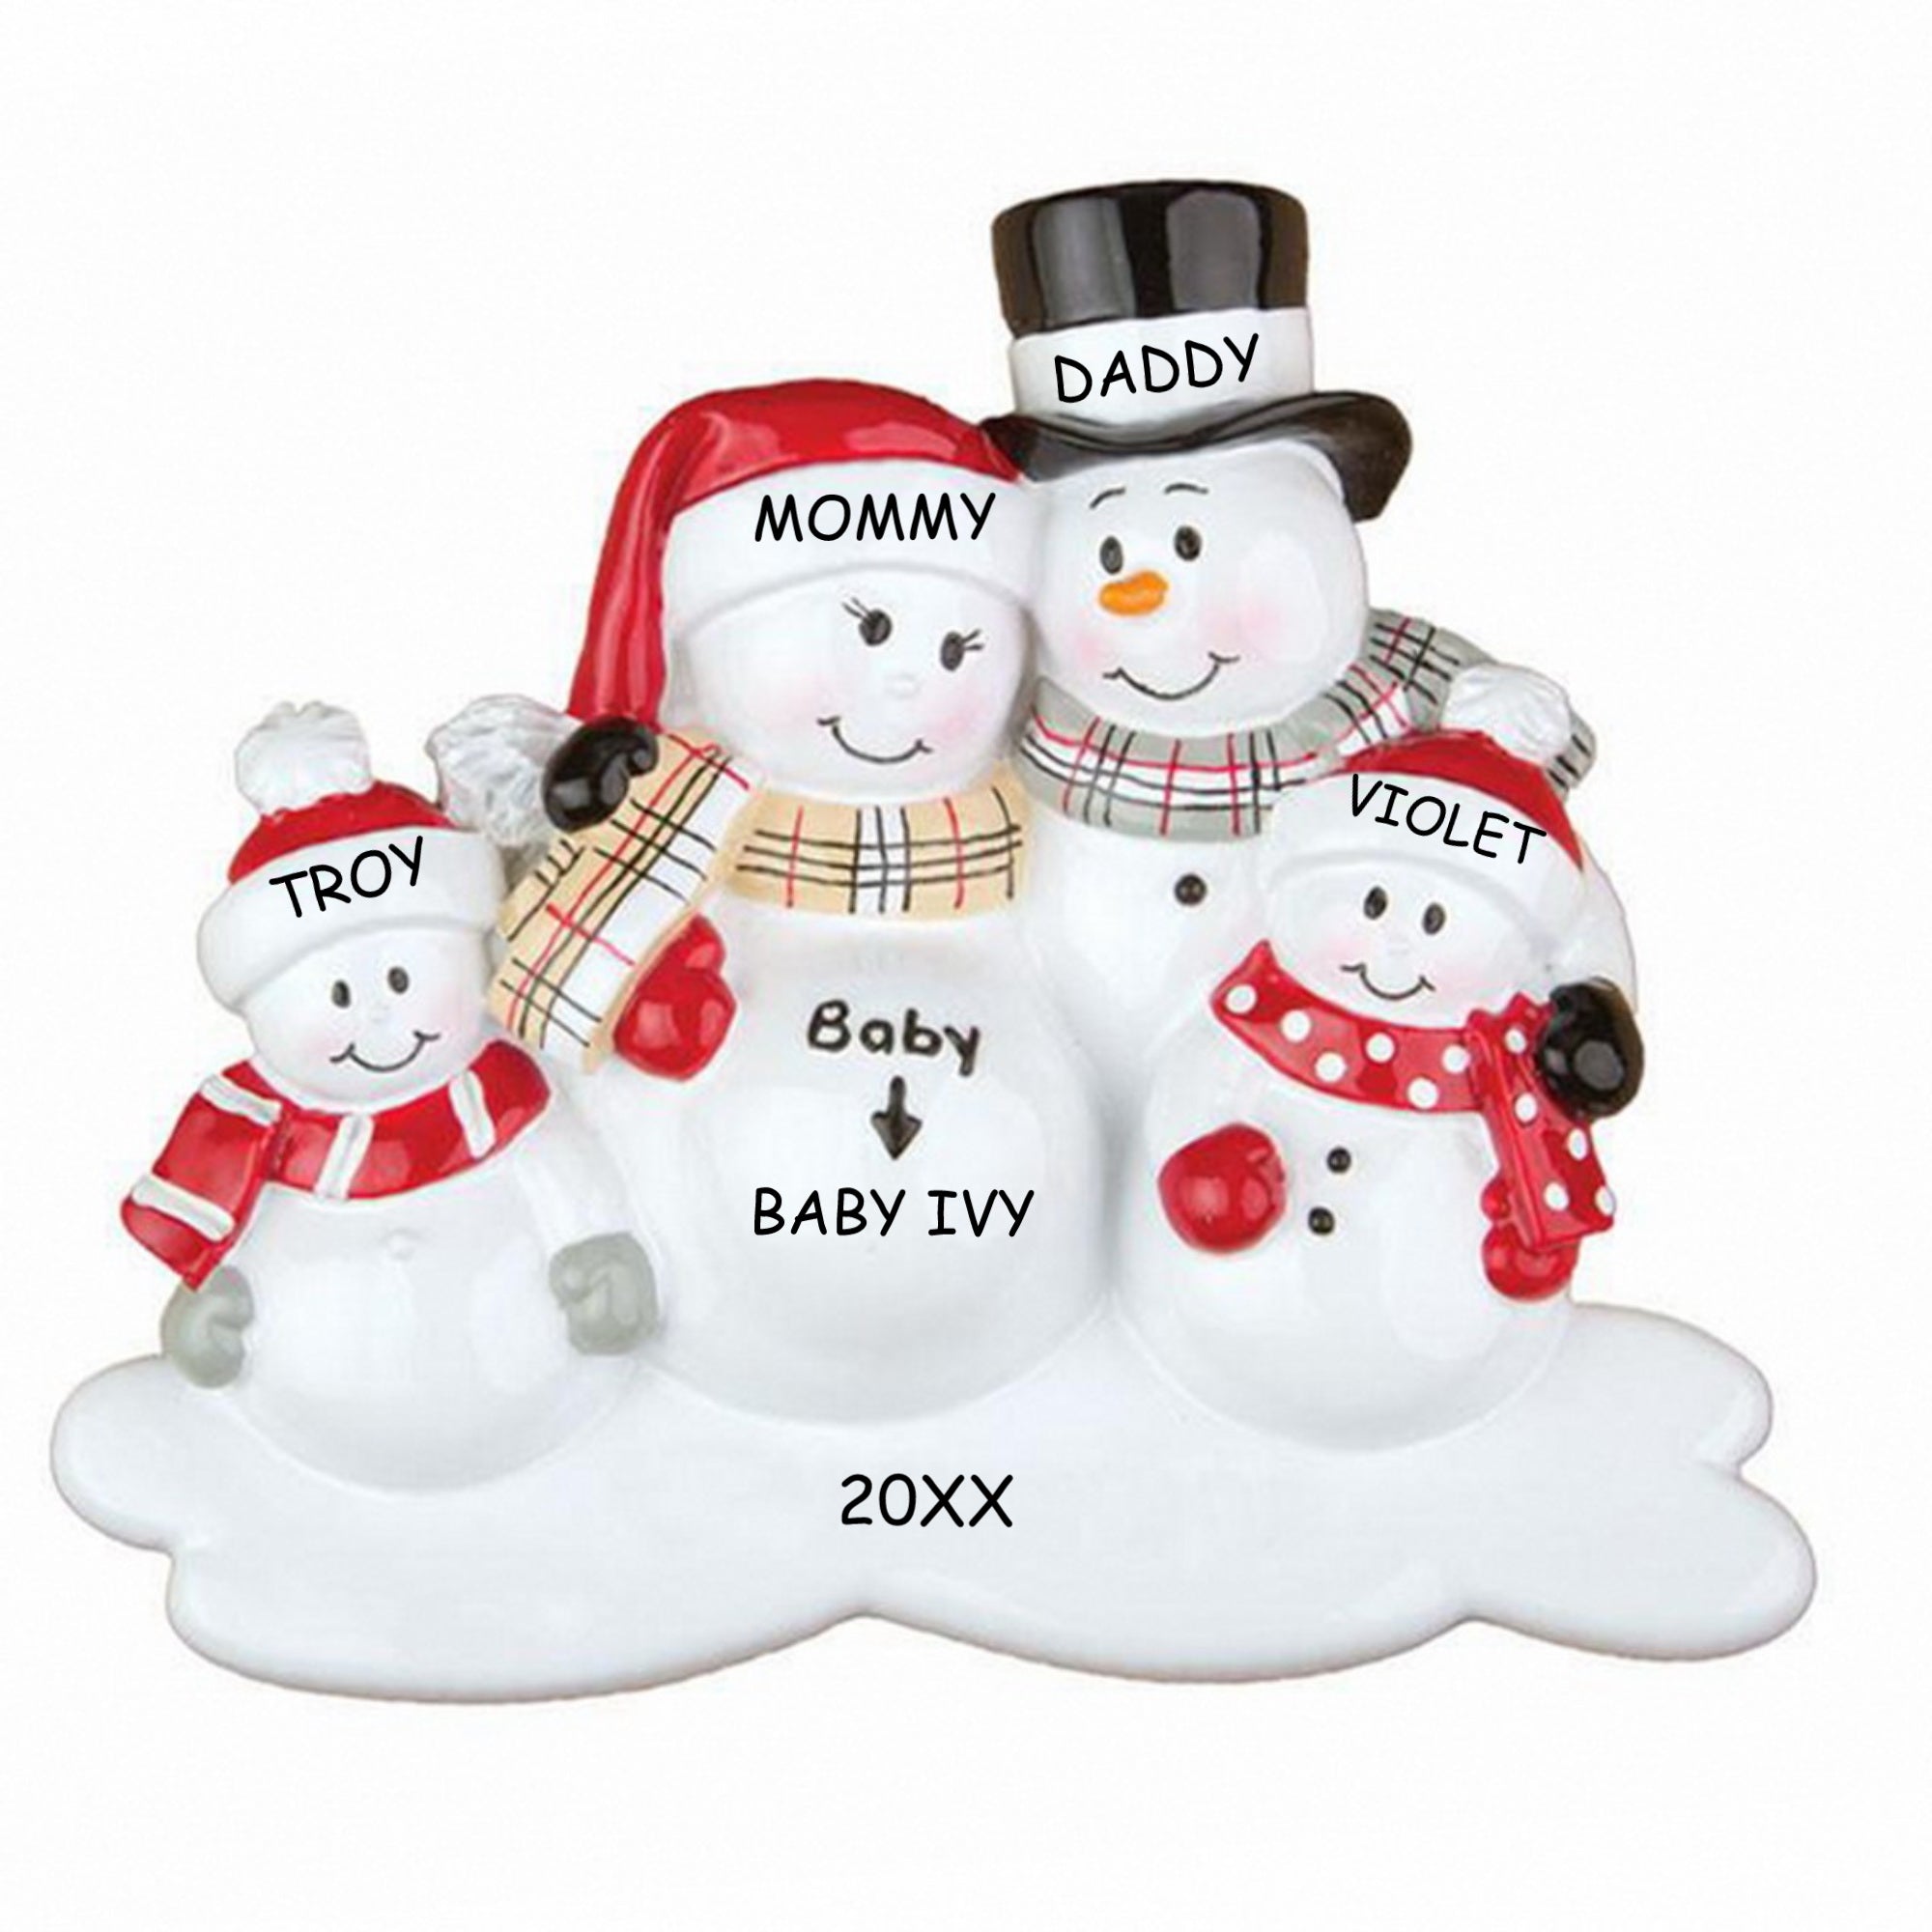 Personalized We're Expecting Snowman Family Christmas Ornament - Family of 5